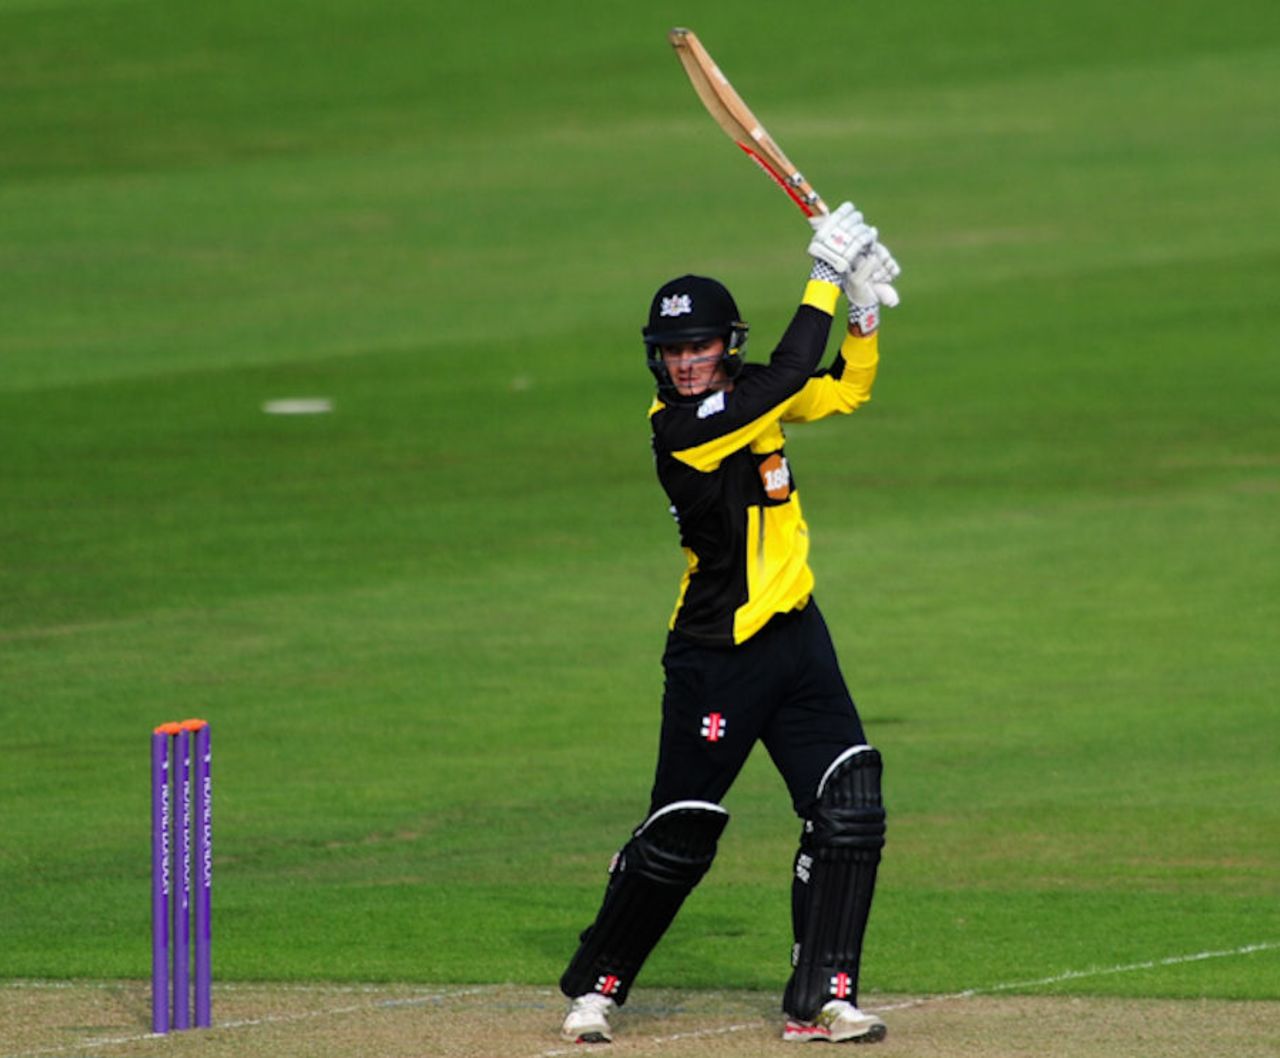 Gareth Roderick on the attack for Gloucestershire, Glamorgan v Gloucestershire, Royal London One-Day Cup, Cardiff, June 6, 2016